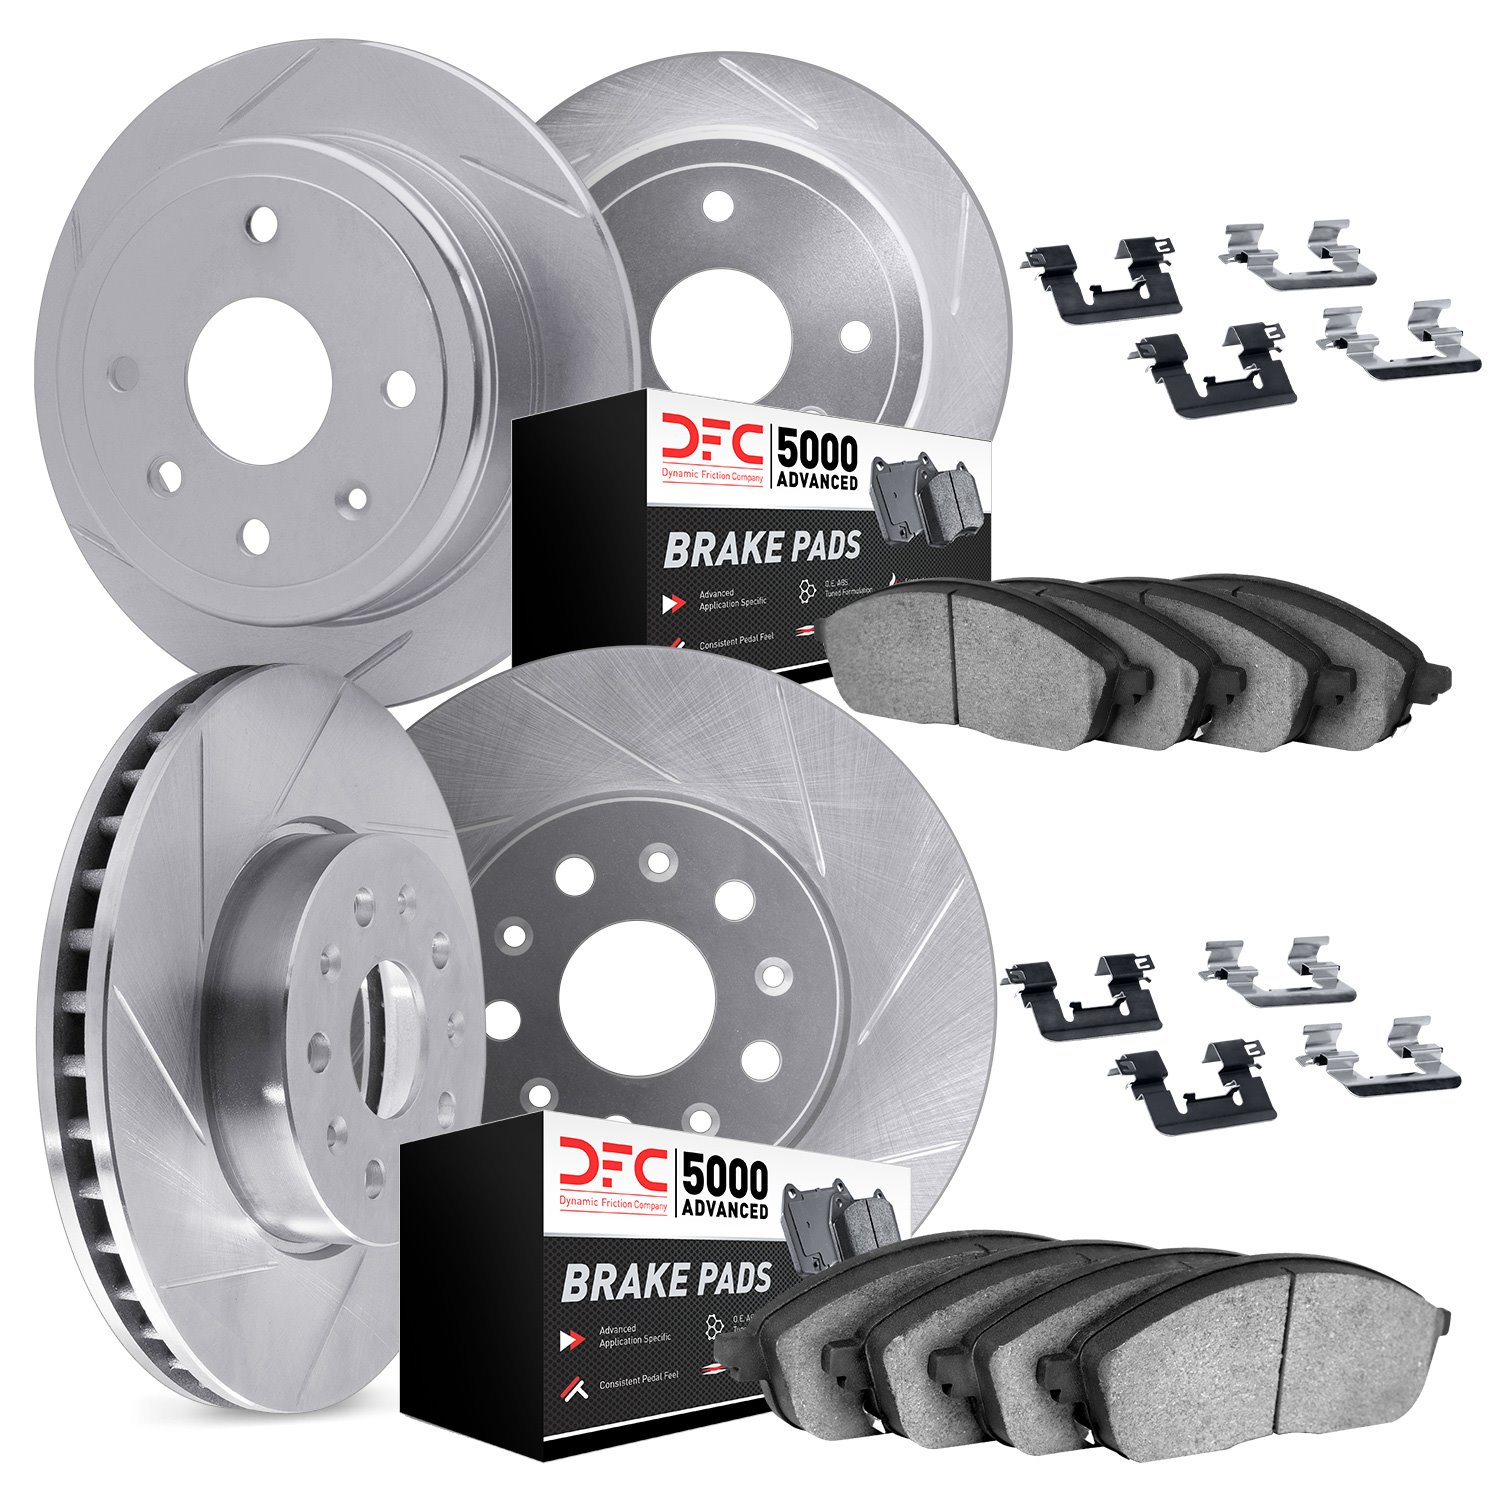 5514-59044 Slotted Brake Rotors w/5000 Advanced Brake Pads Kit & Hardware [Silver], 2005-2006 Acura/Honda, Position: Front and R